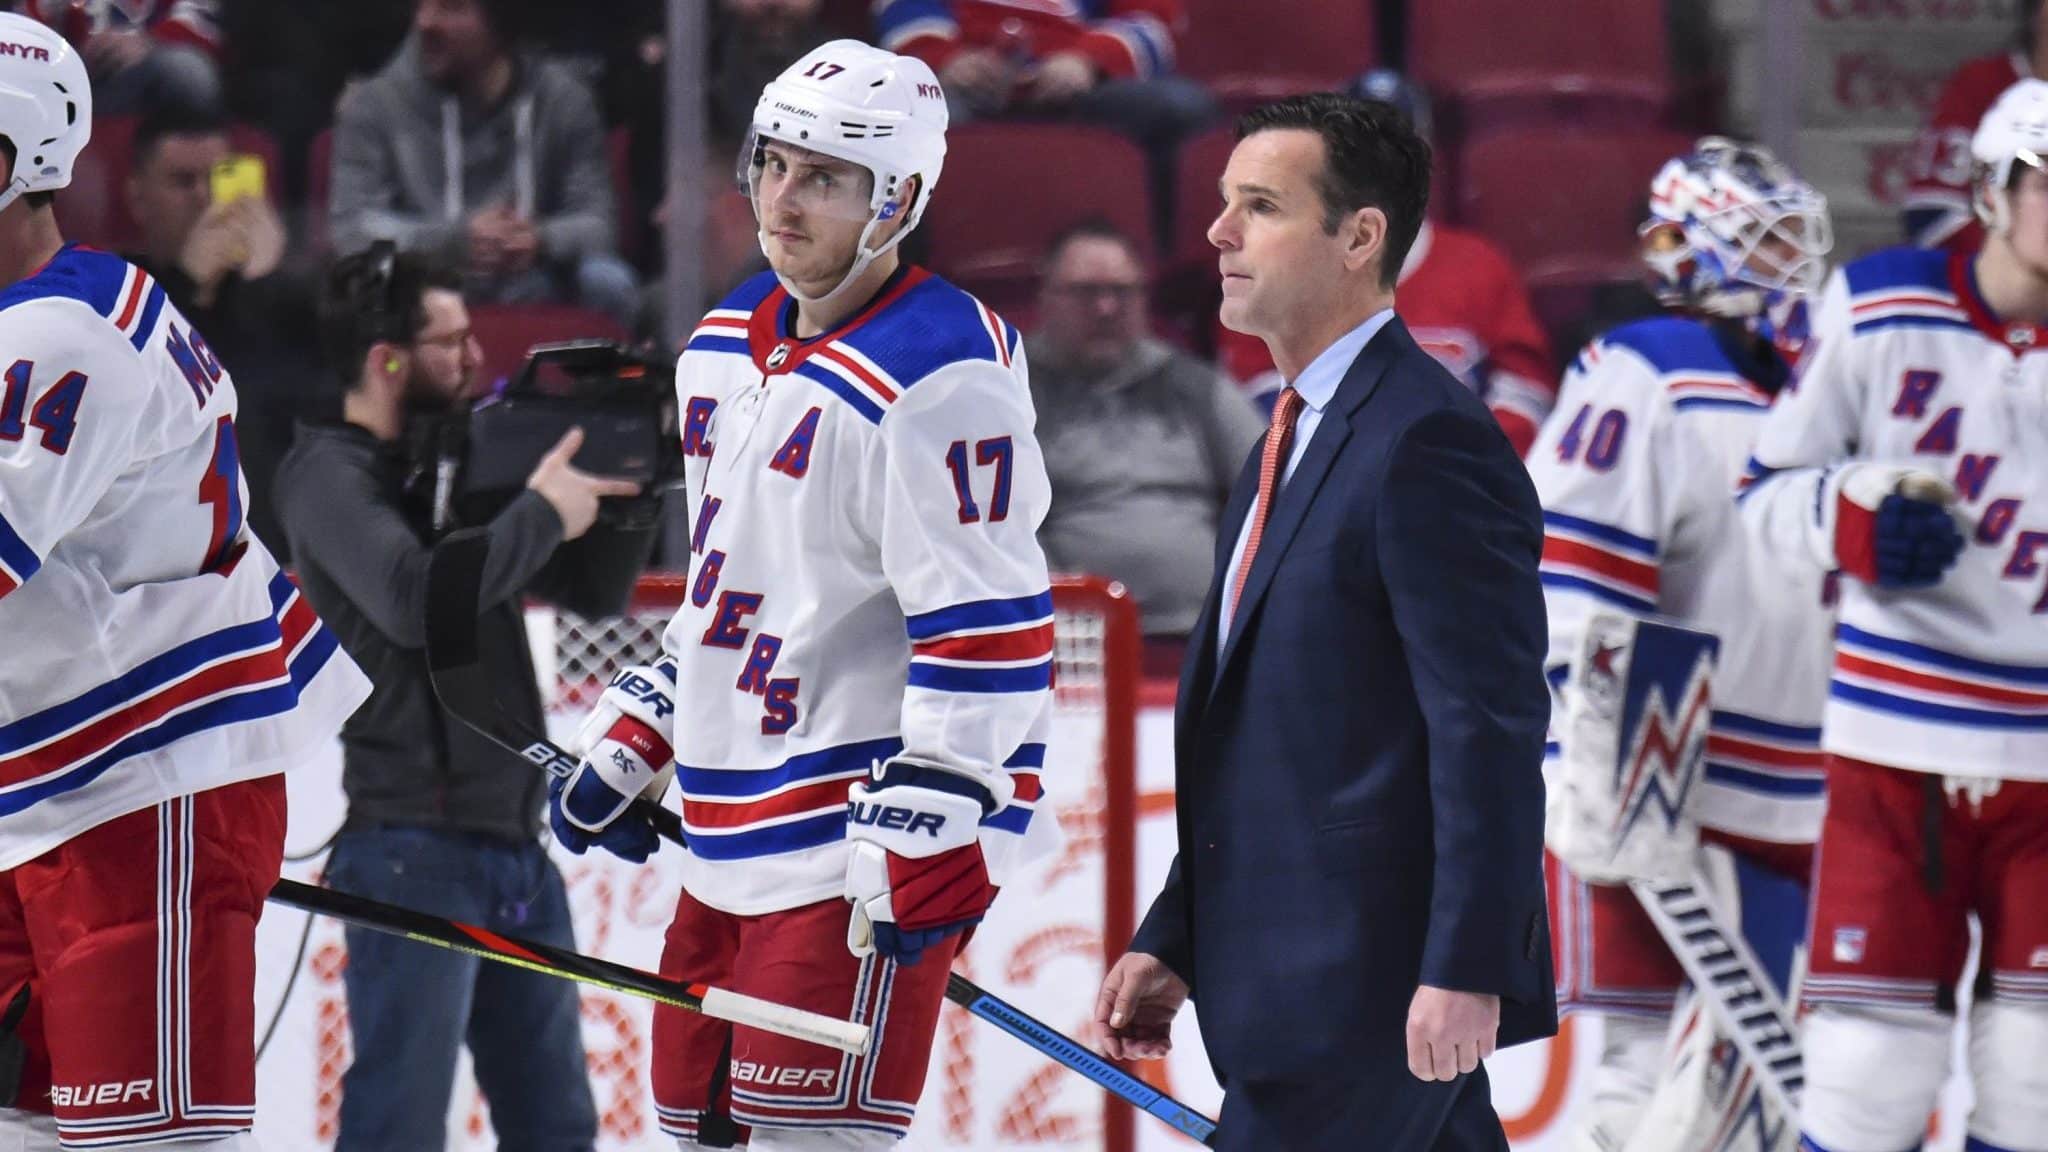 MONTREAL, QC - FEBRUARY 27: Head coach of the New York Rangers David Quinn walks across the rink after a victory against the Montreal Canadiens at the Bell Centre on February 27, 2020 in Montreal, Canada. The New York Rangers defeated the Montreal Canadiens 5-2.